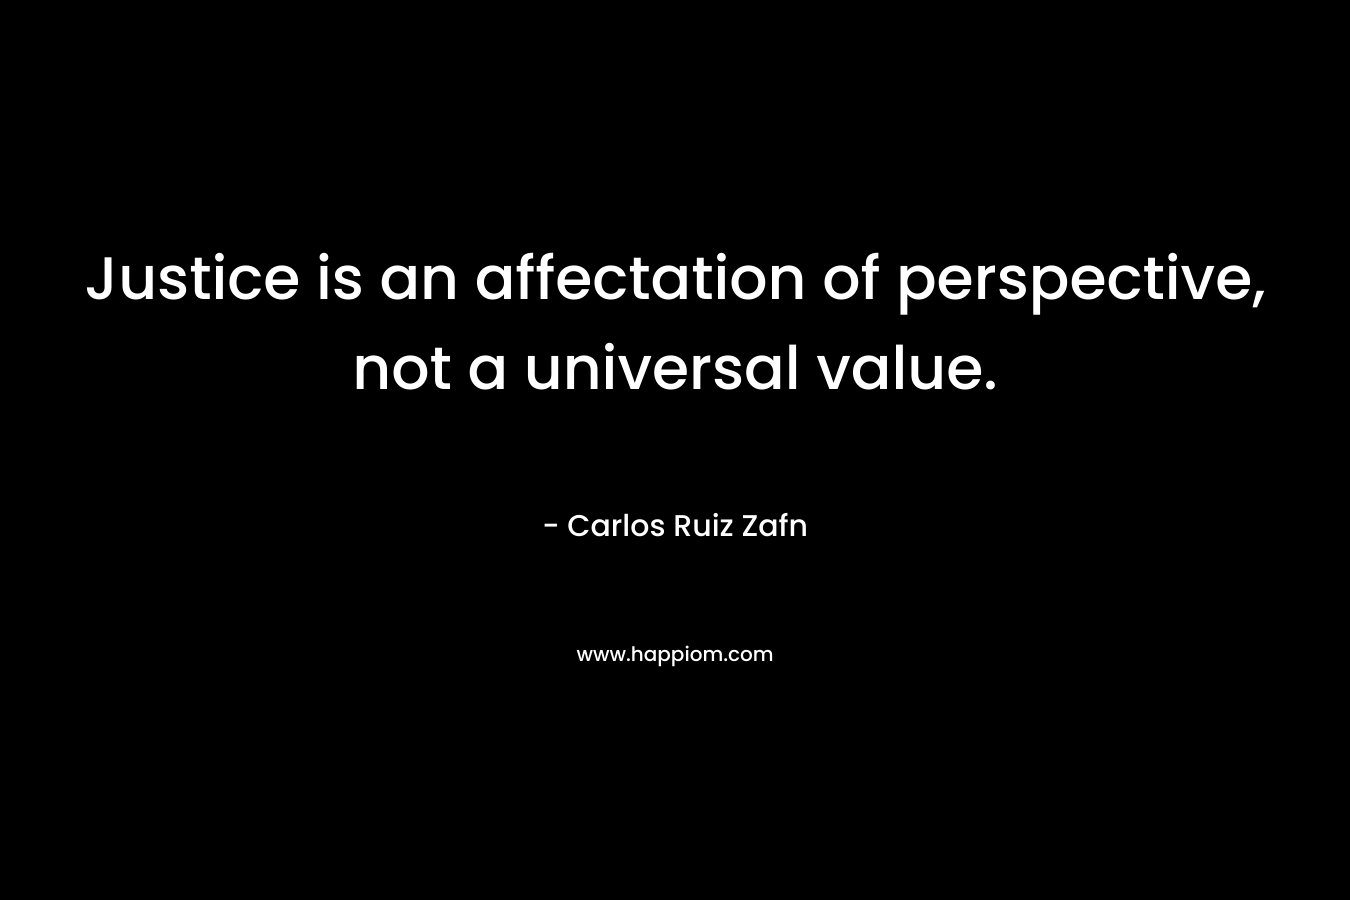 Justice is an affectation of perspective, not a universal value.